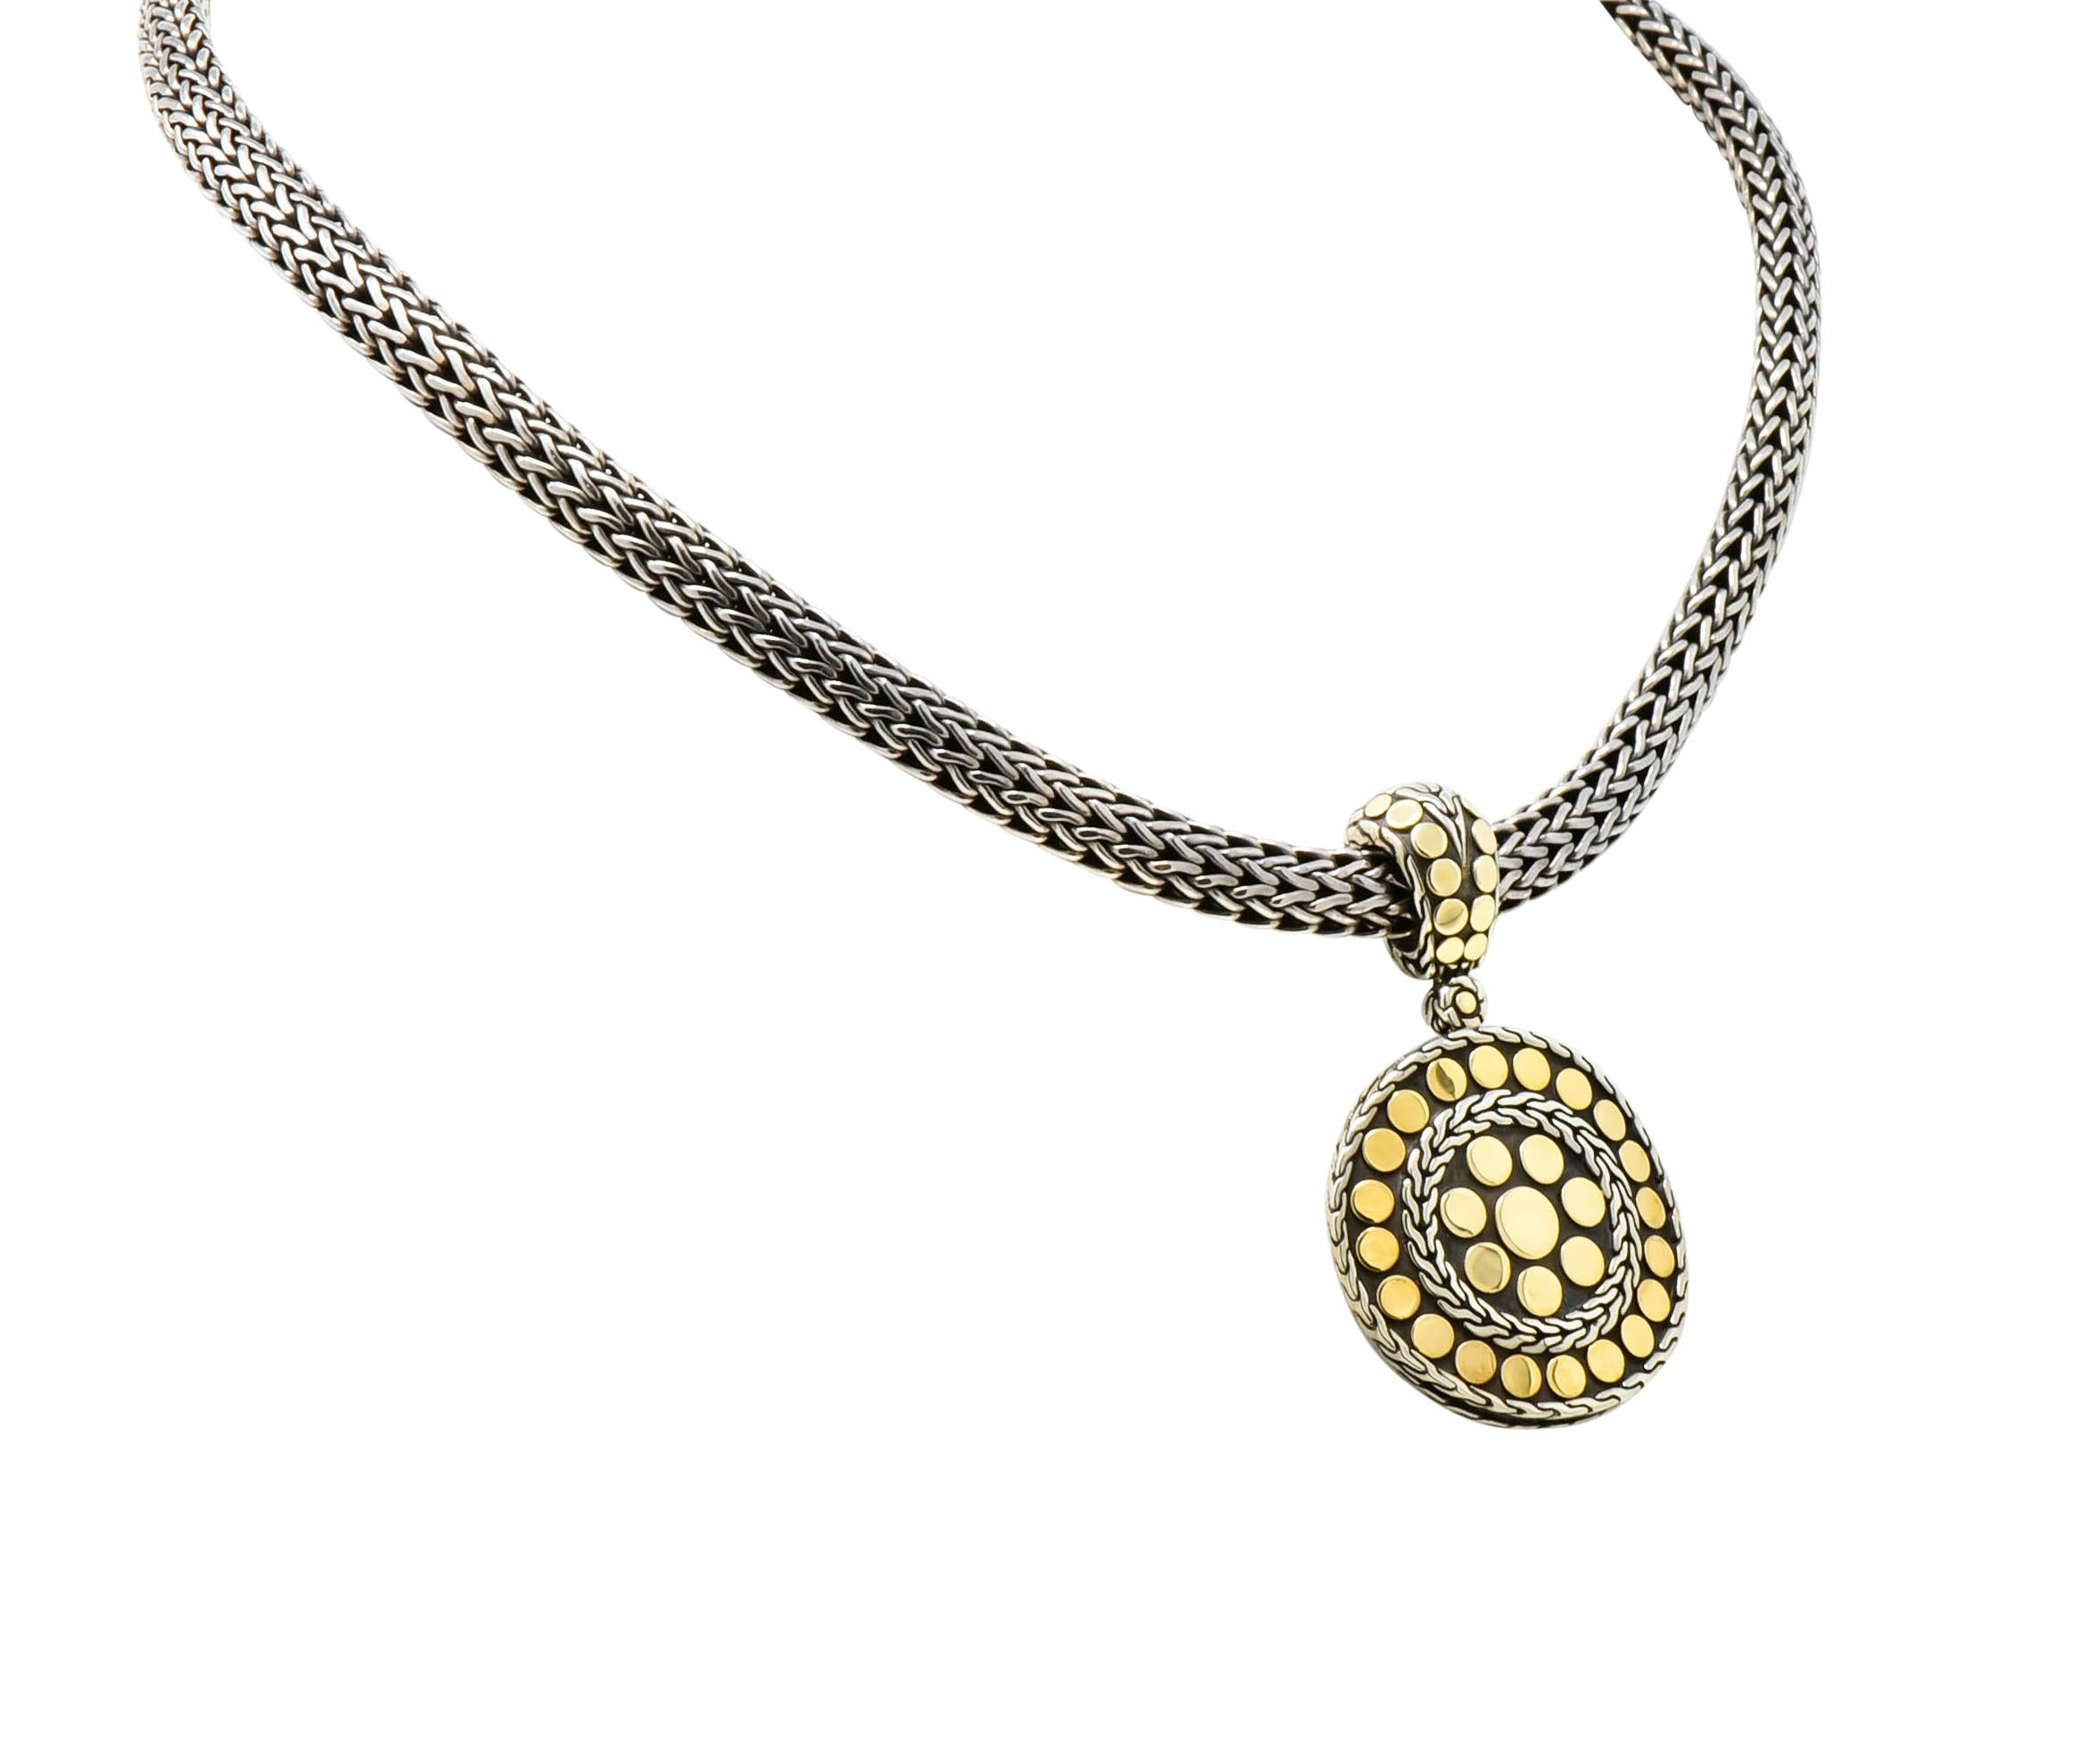 Designed as a circular, removable, enhancer pendant

Accented throughout by high polished gold dots and surrounded by wheat motif

Accompanied by a substantial sterling silver woven wheat chain completed by a decorative single presser clasp

From